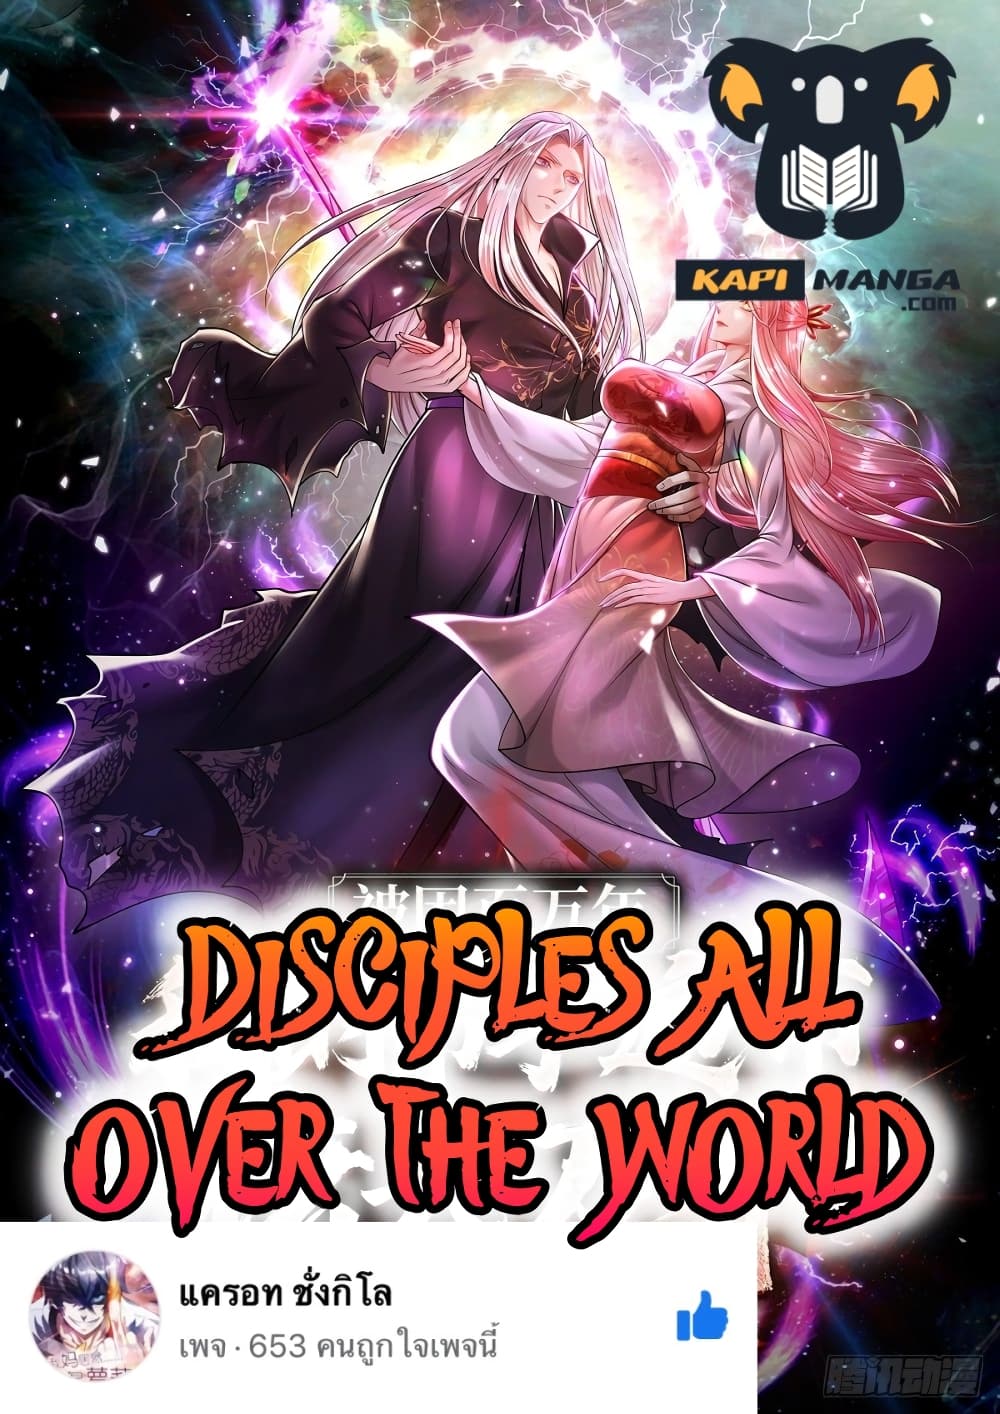 Disciples All Over the World 231 01